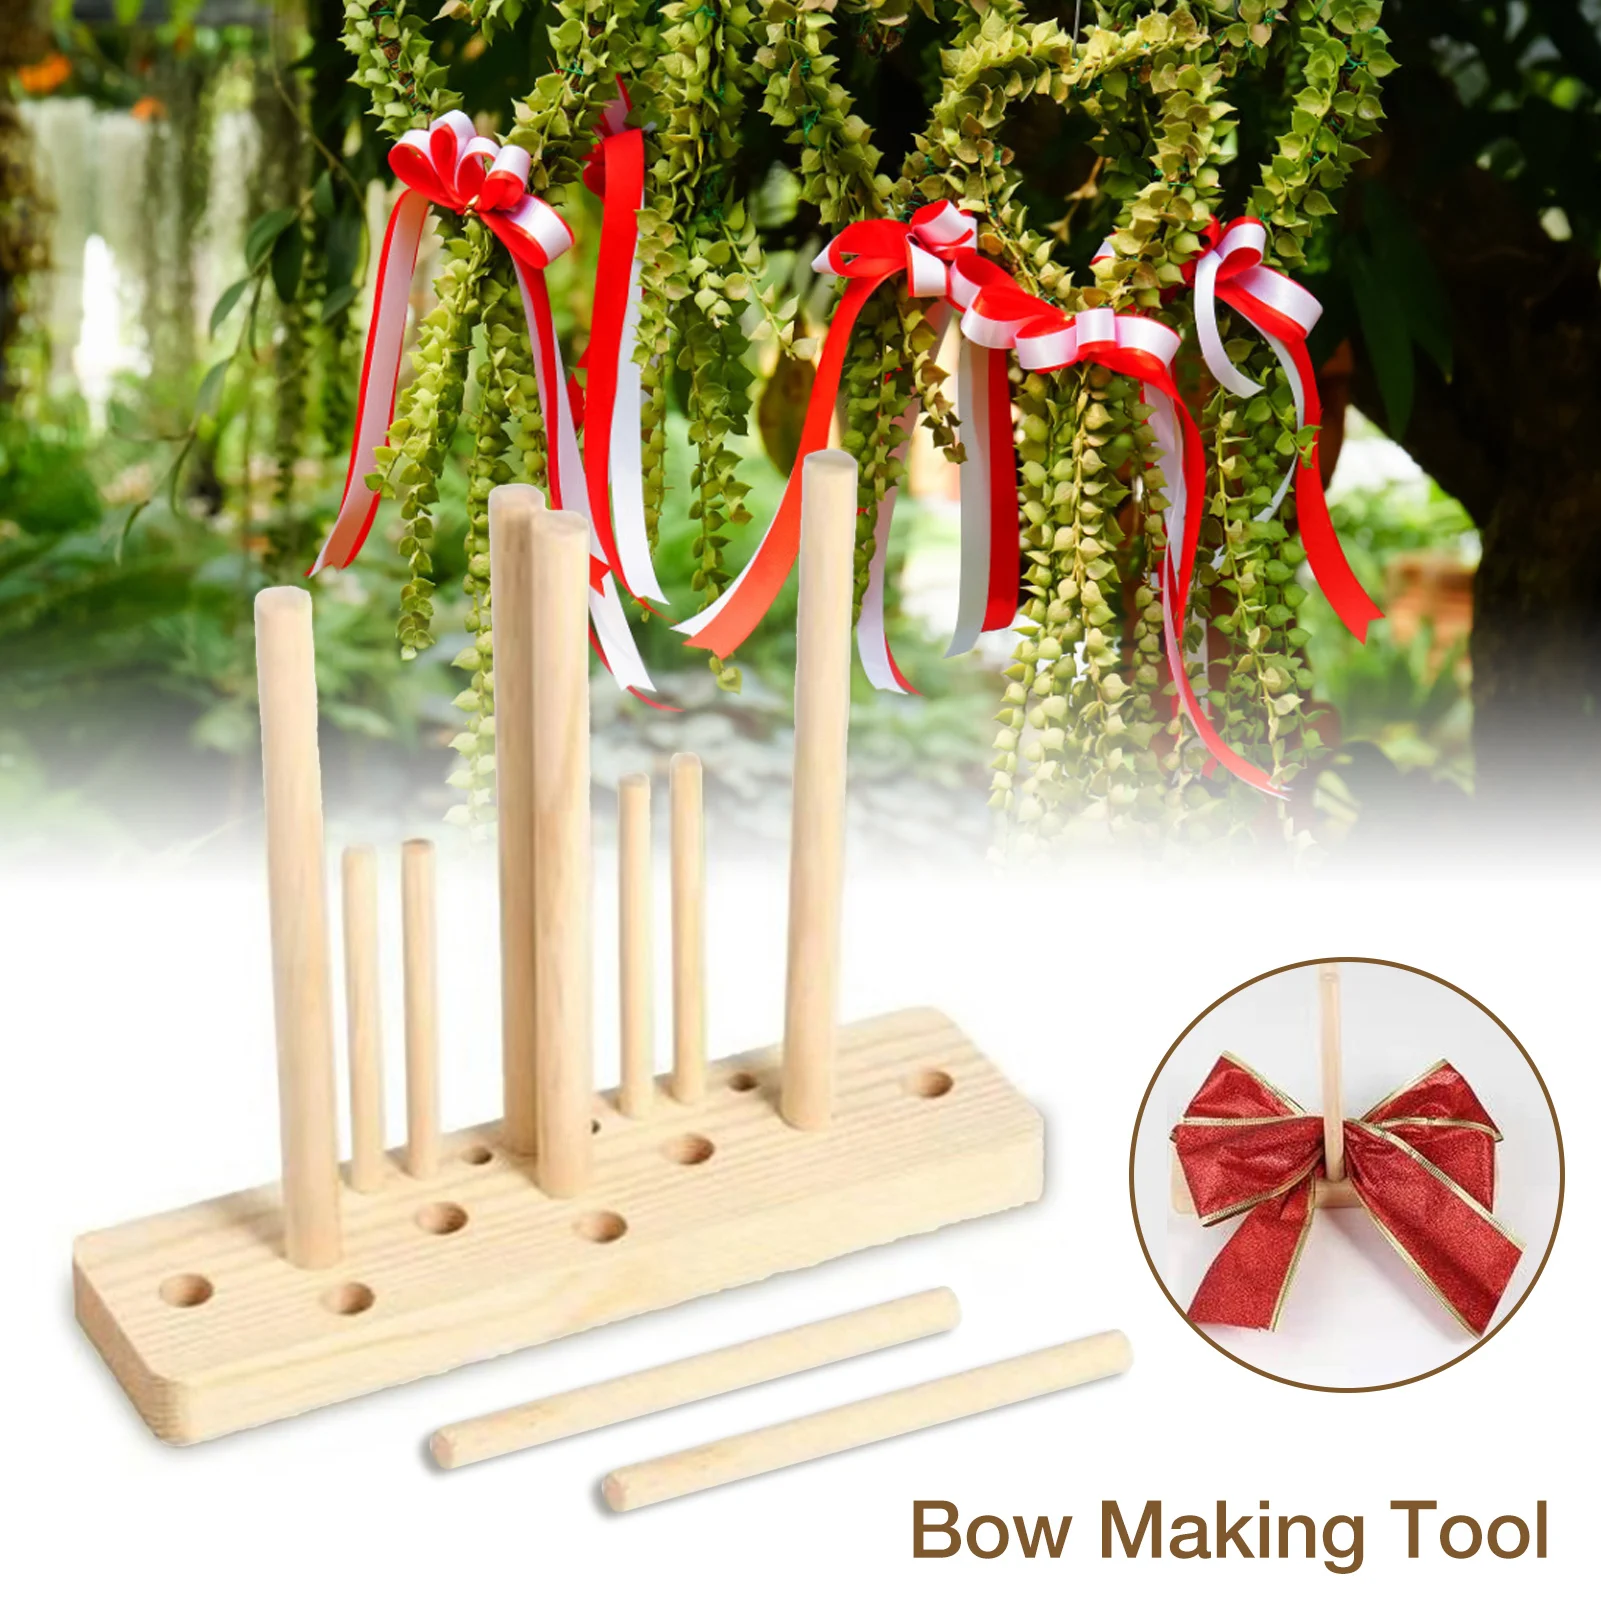 Bow Maker 5 In 1 Ribbon Bowknot Maker Wooden Wreath Bowing Making Tool DIY Ribbon Crafts For Party Birthday Decoration Gifts